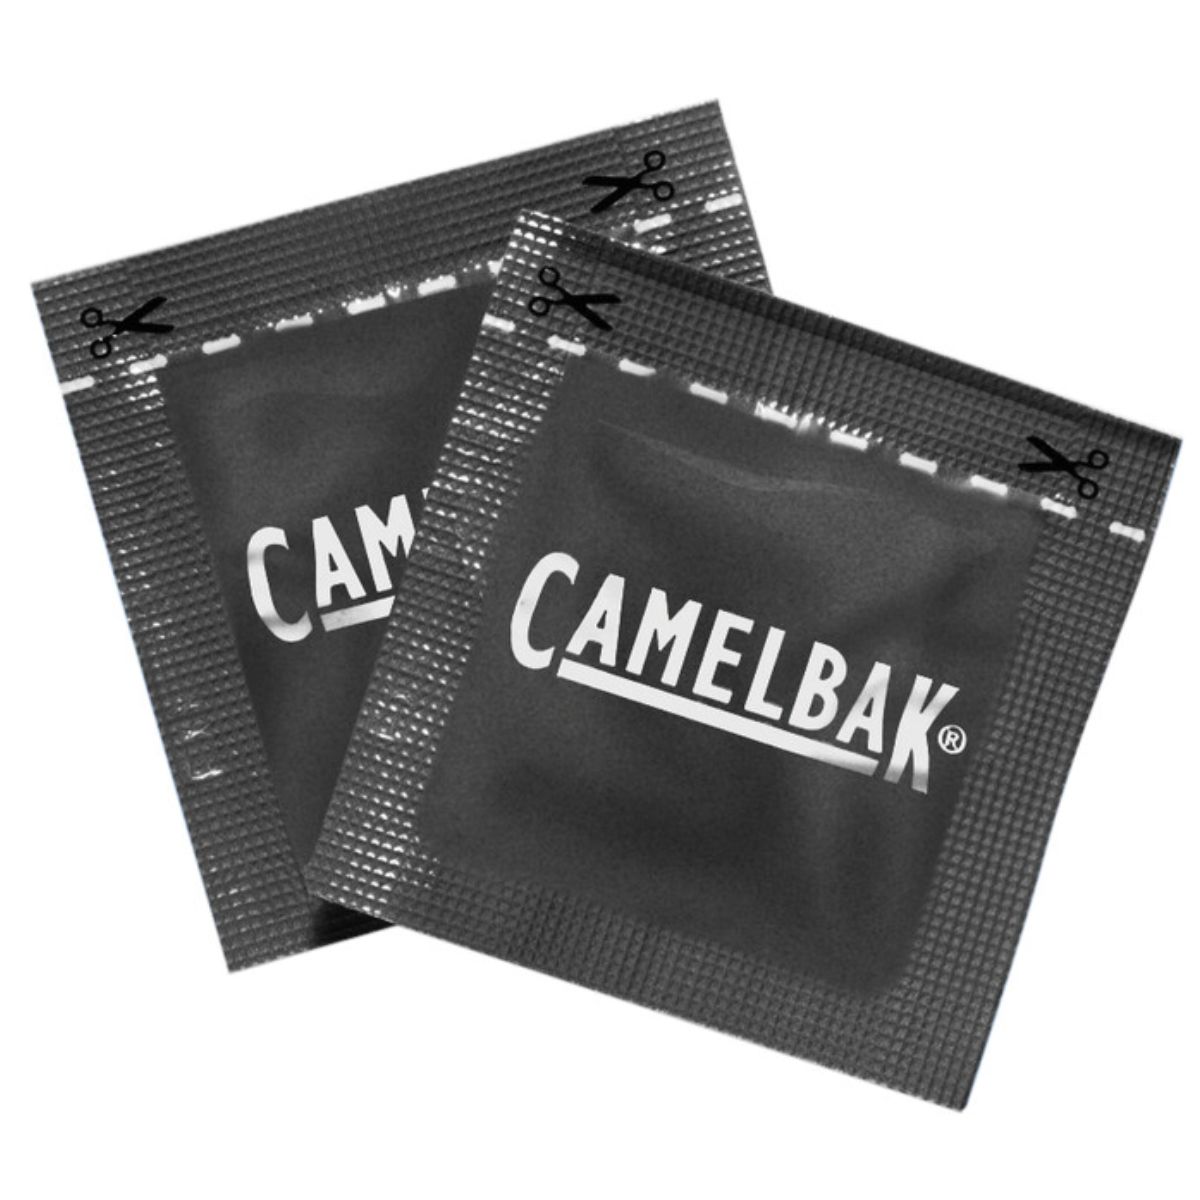 CAMELBAK CLEANING TABLETS (8 PACK)